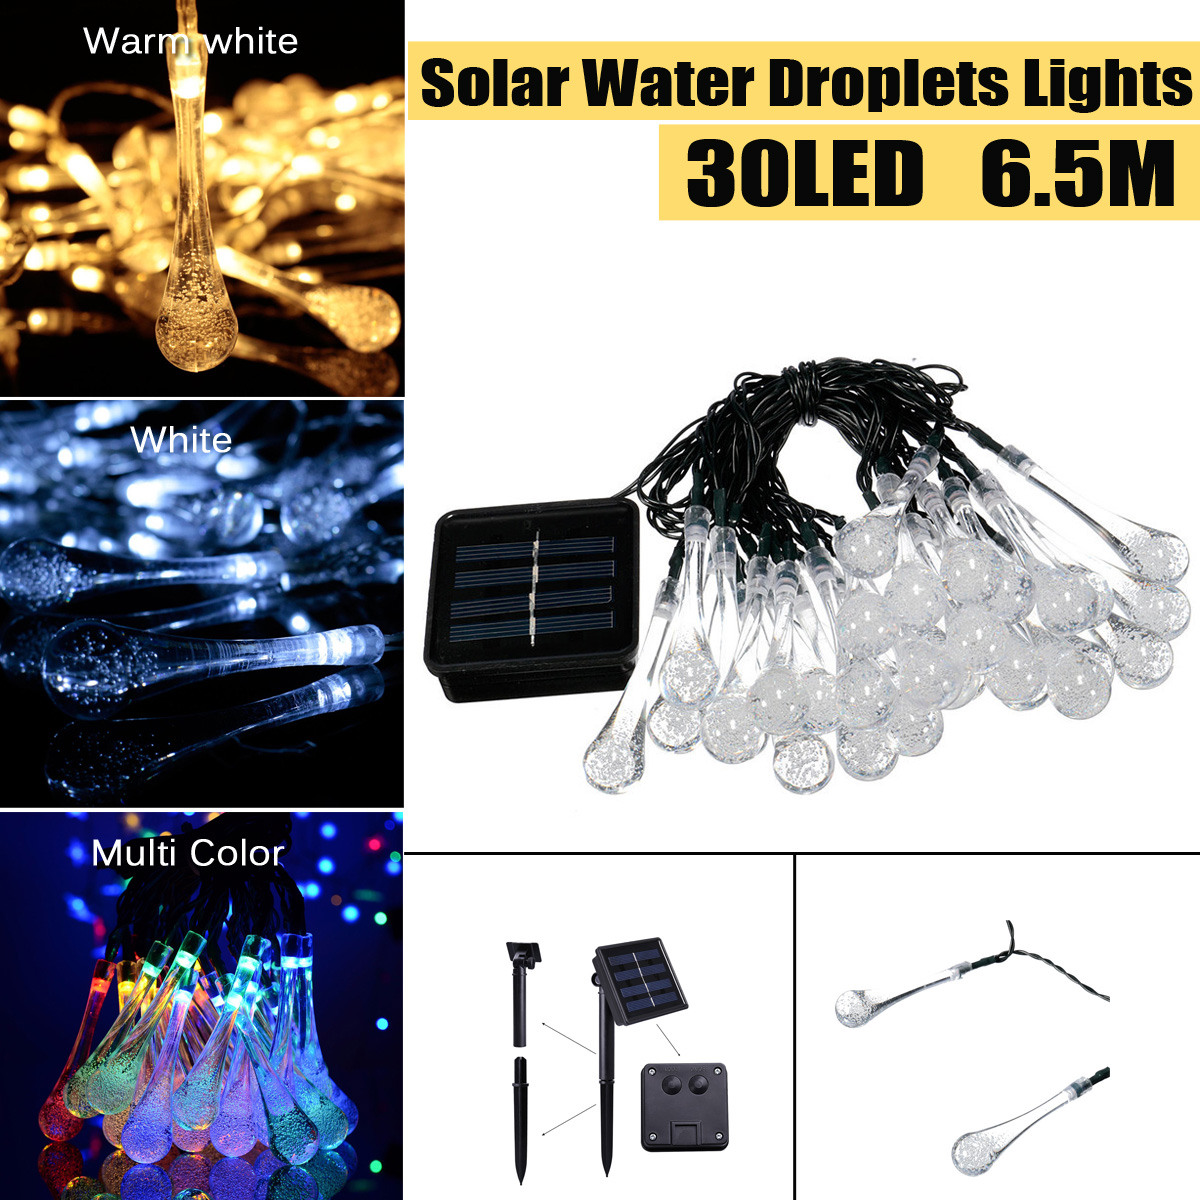 65M-30LED-Solar-Water-Drop-String-Lights-Wide-Angle-LED-Raindrop-Teardrop-Outdoor-Fairy-String-Light-1707670-1